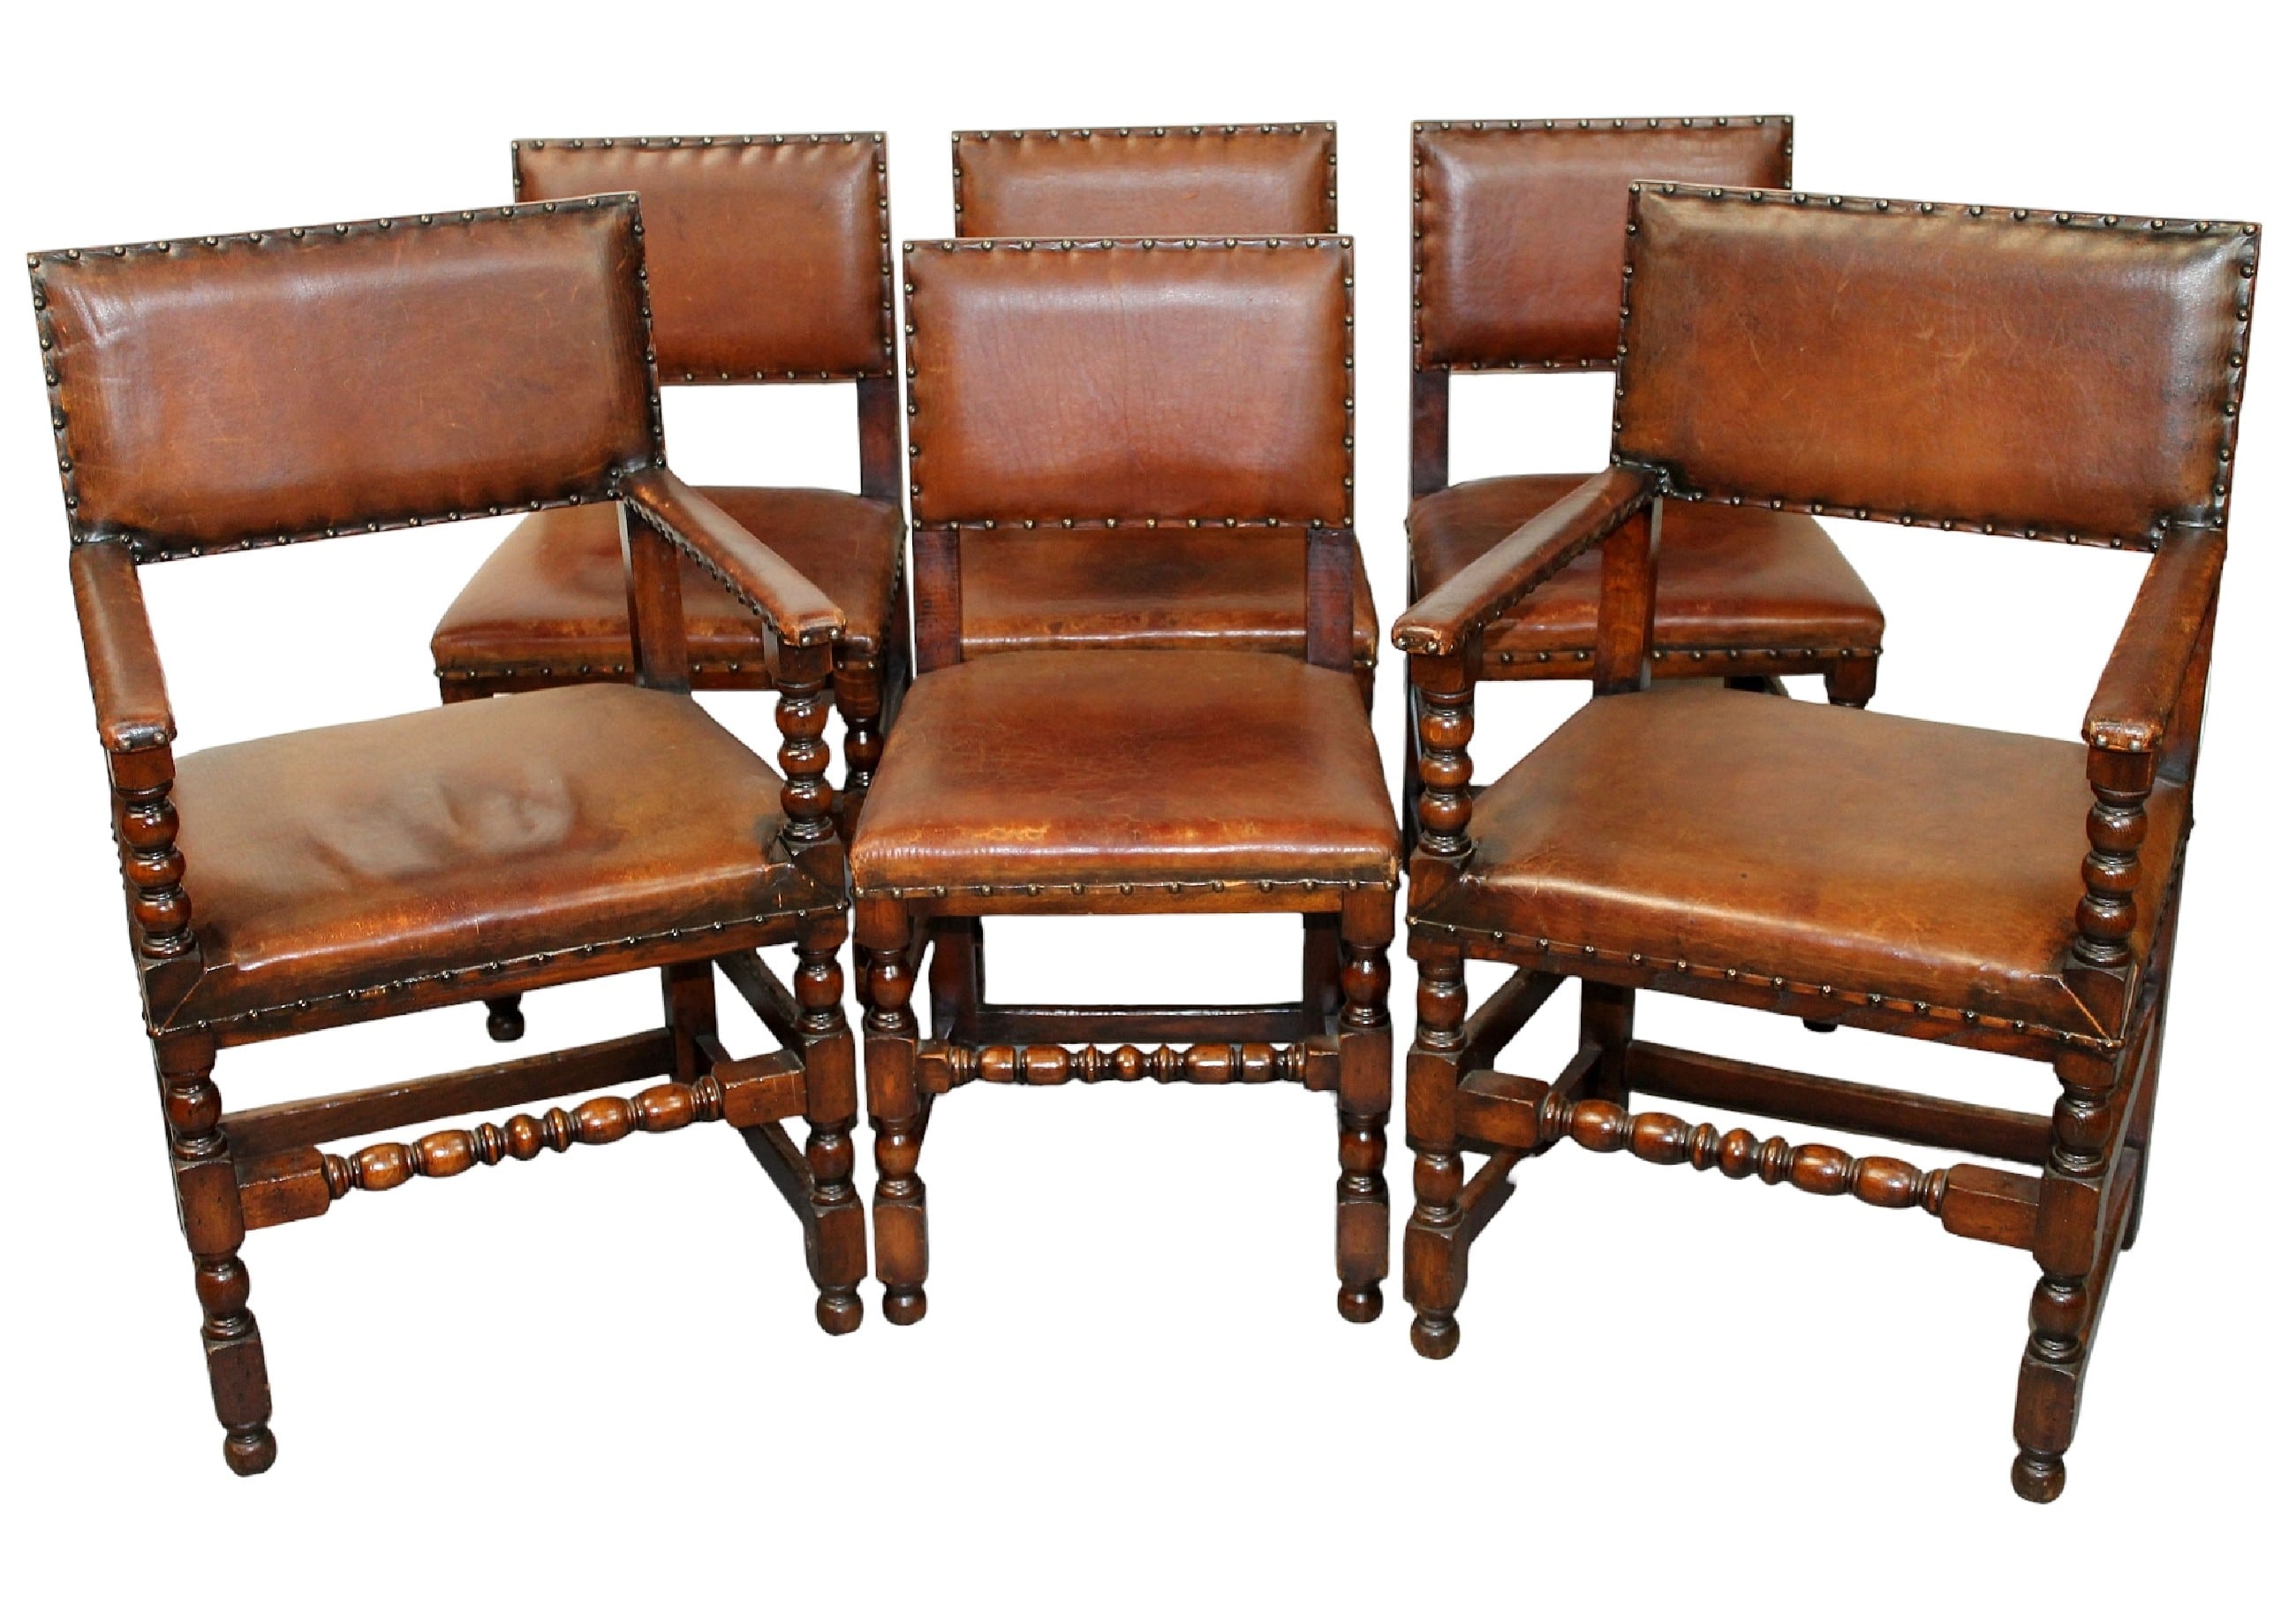 Set of 6 French leather dining chairs